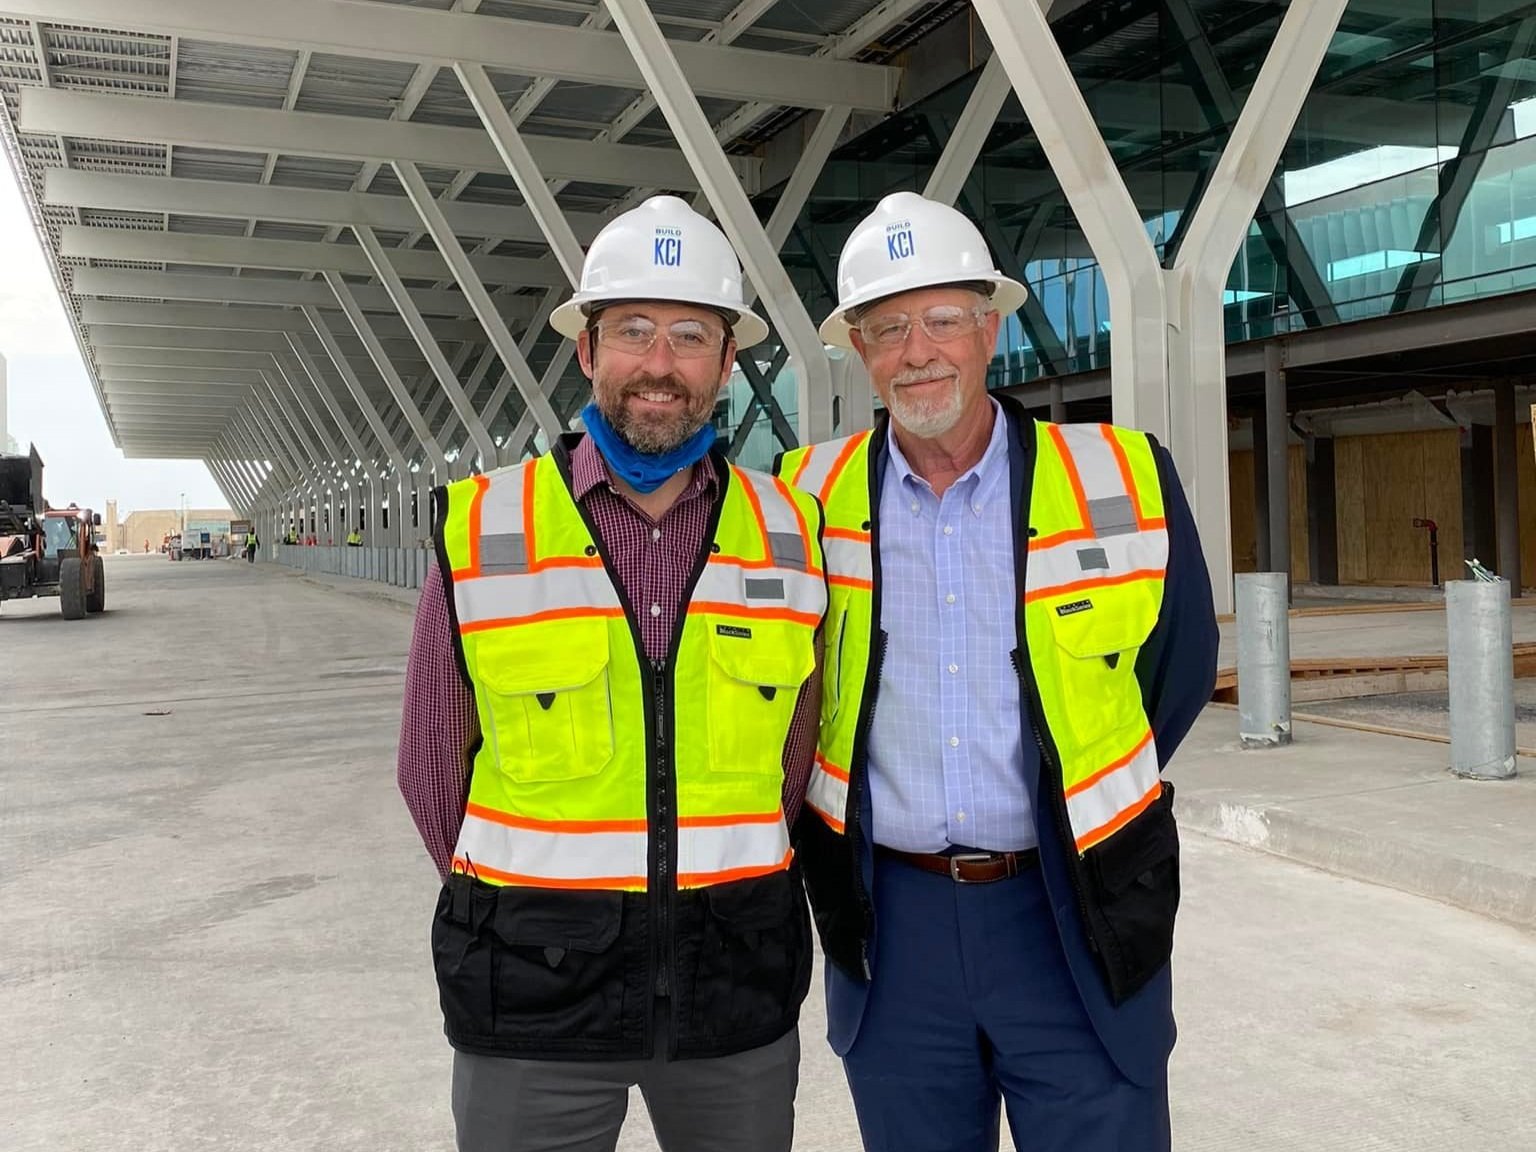 Toured the new KCI Terminal with Councilman O'Neill